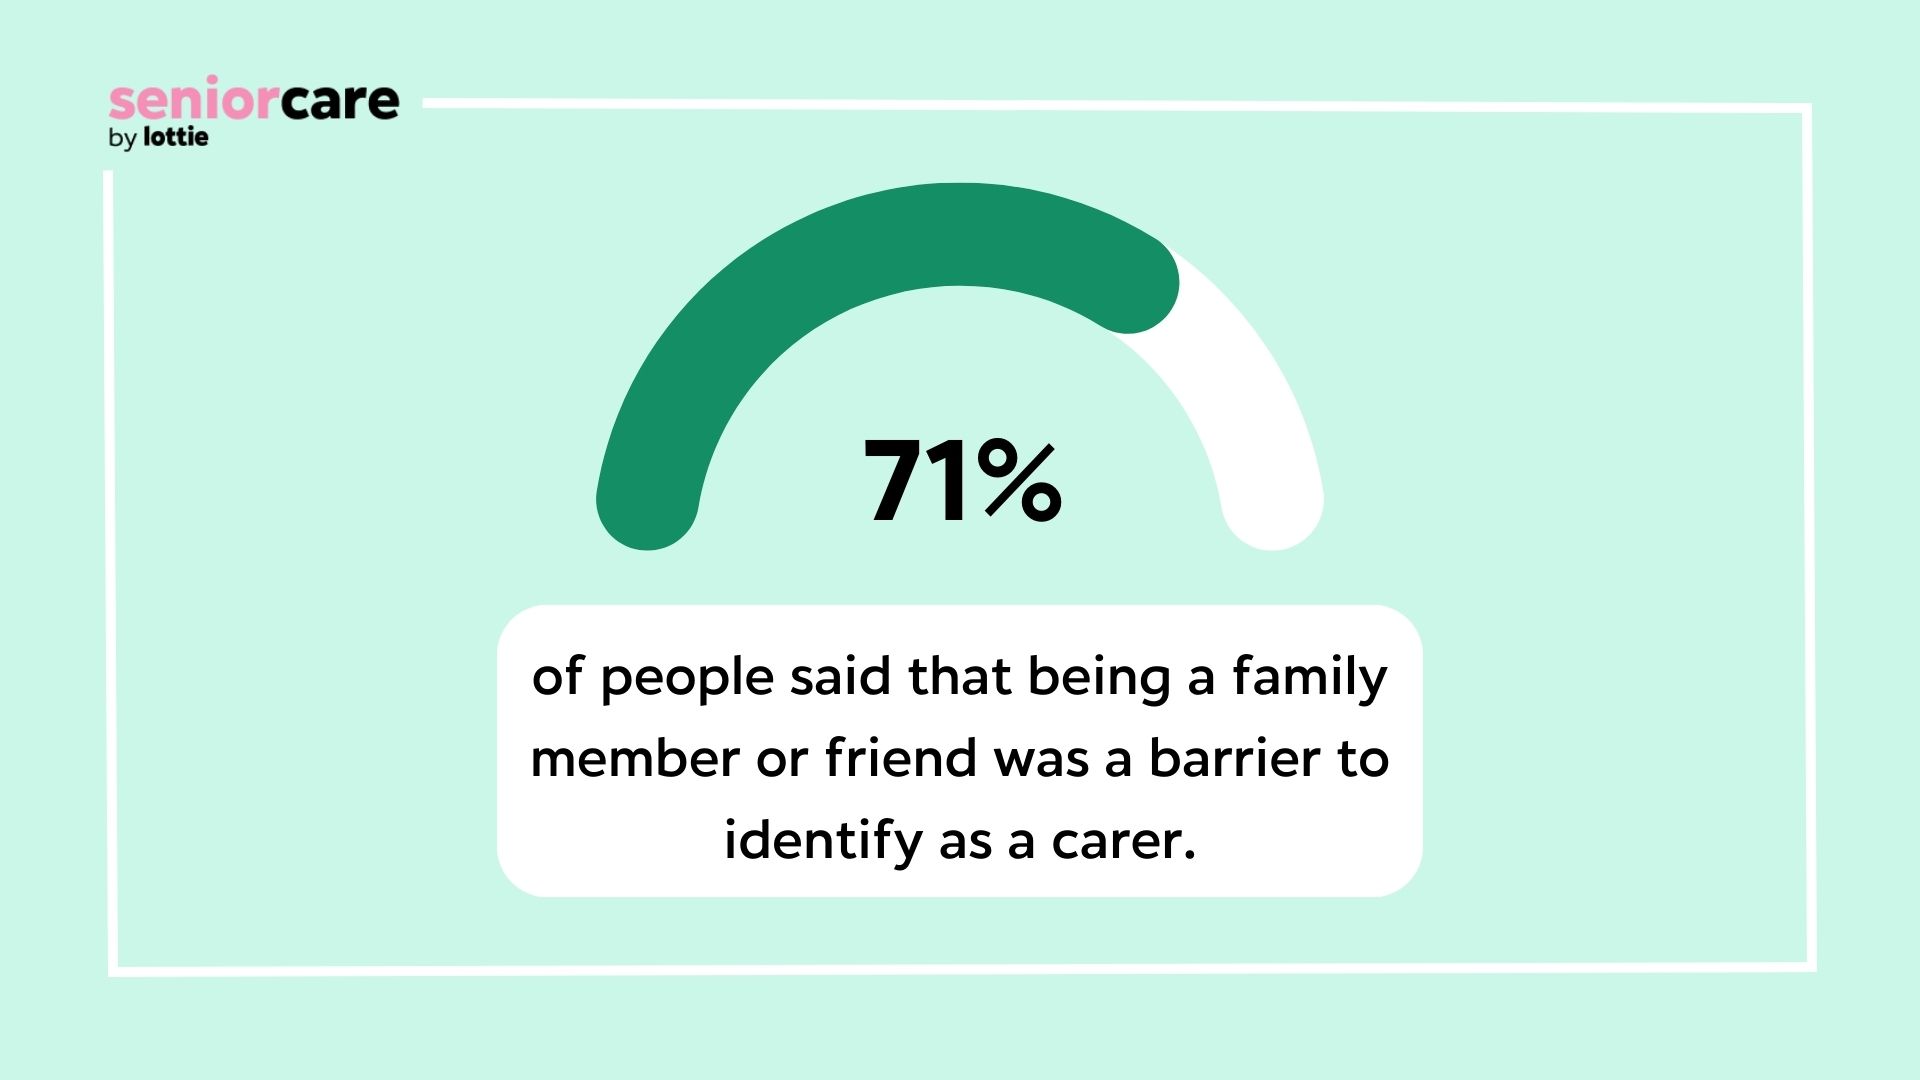 image showing 71% of people said that being a family member or friend was a barrier to being a carer